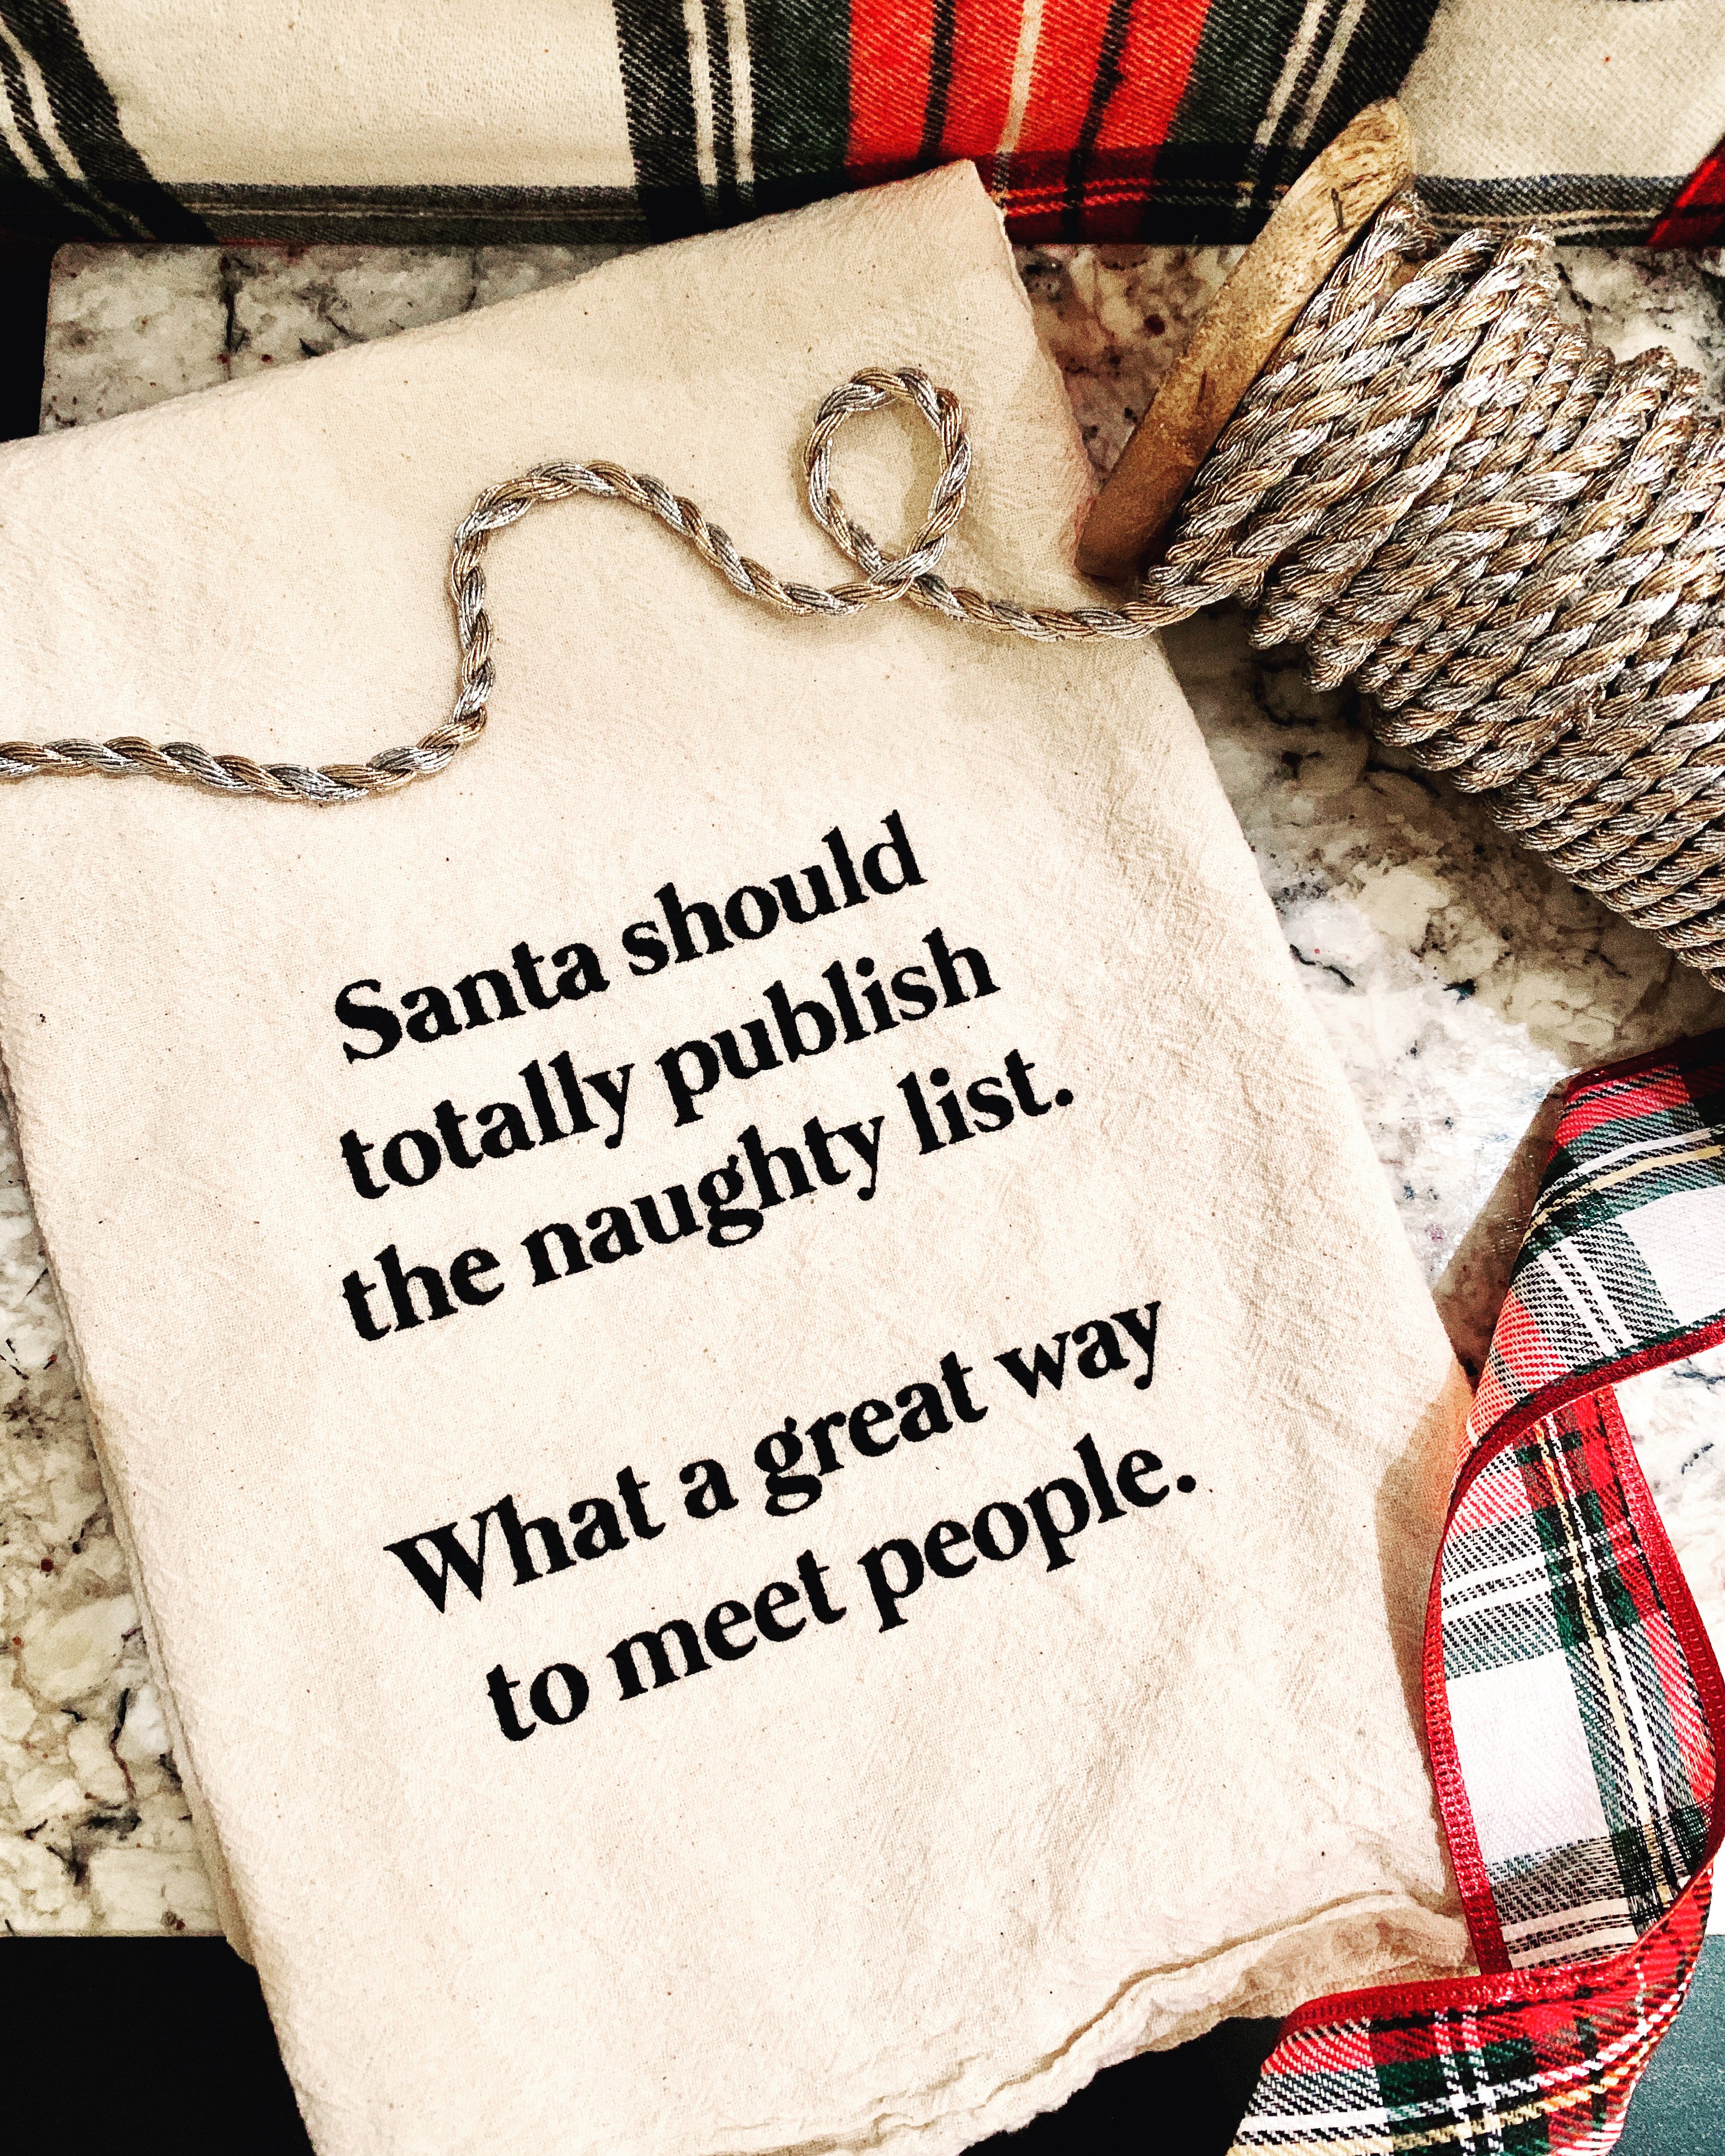 Santa should totally publish the naughty list. What a great way to meet people.